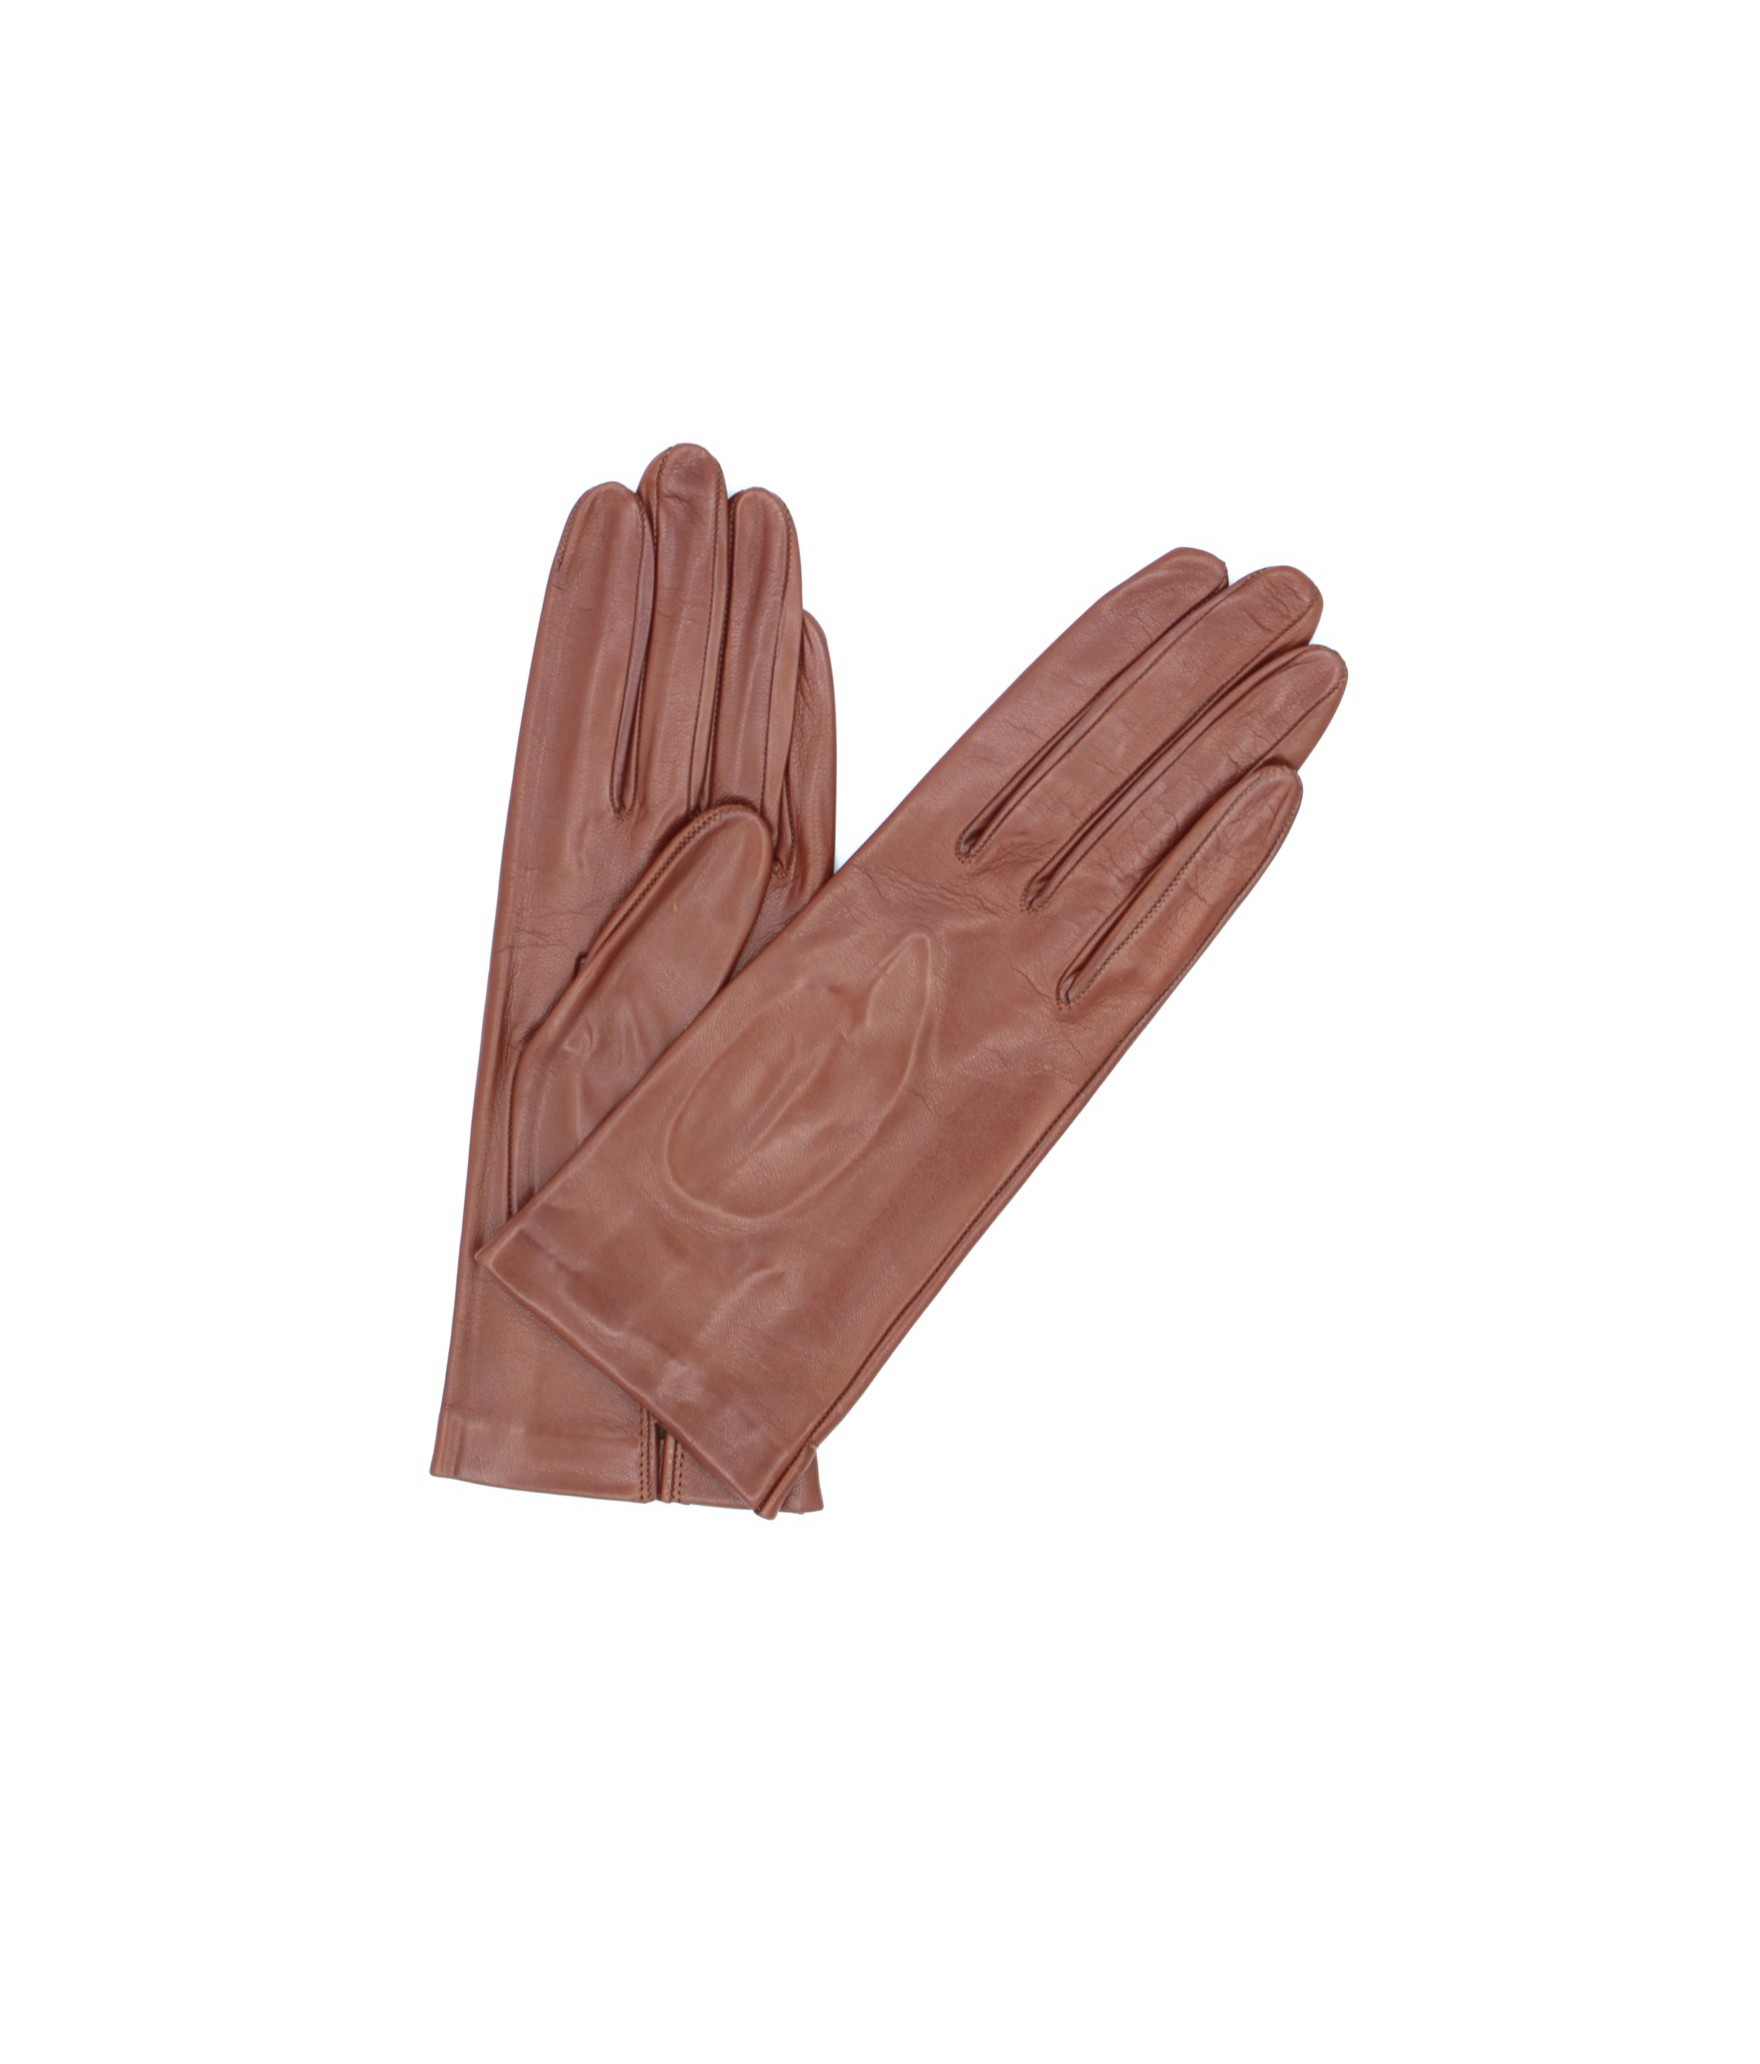 1002 Classic Kid Leather Gloves Silk Lined Cognac 